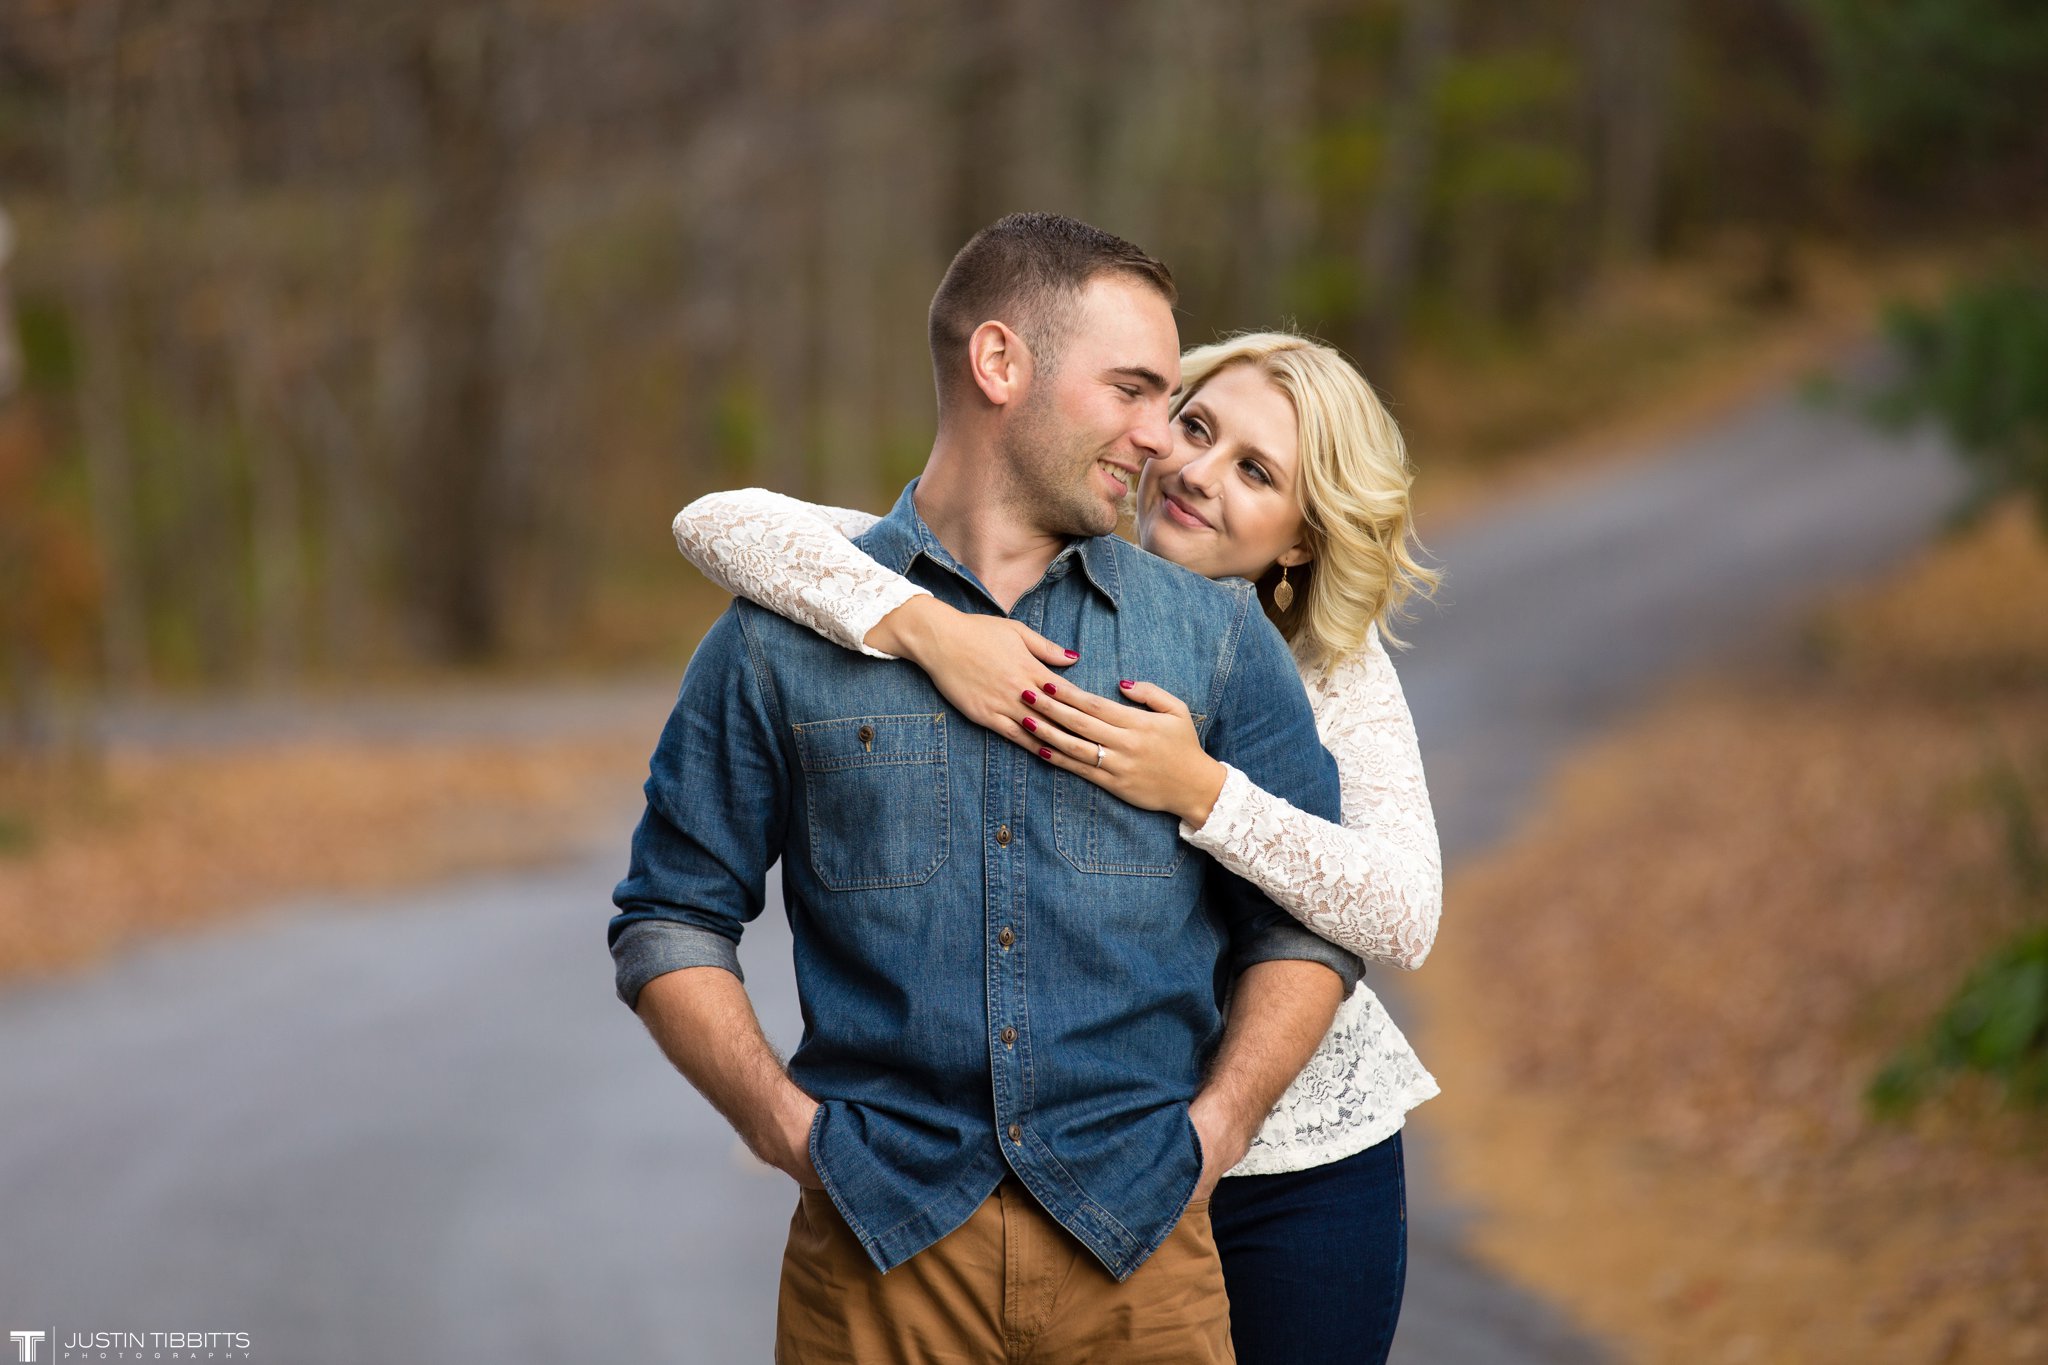 Kenzie and Zach's Colgate Lake Engagement Shoot - Justin Tibbitts ...